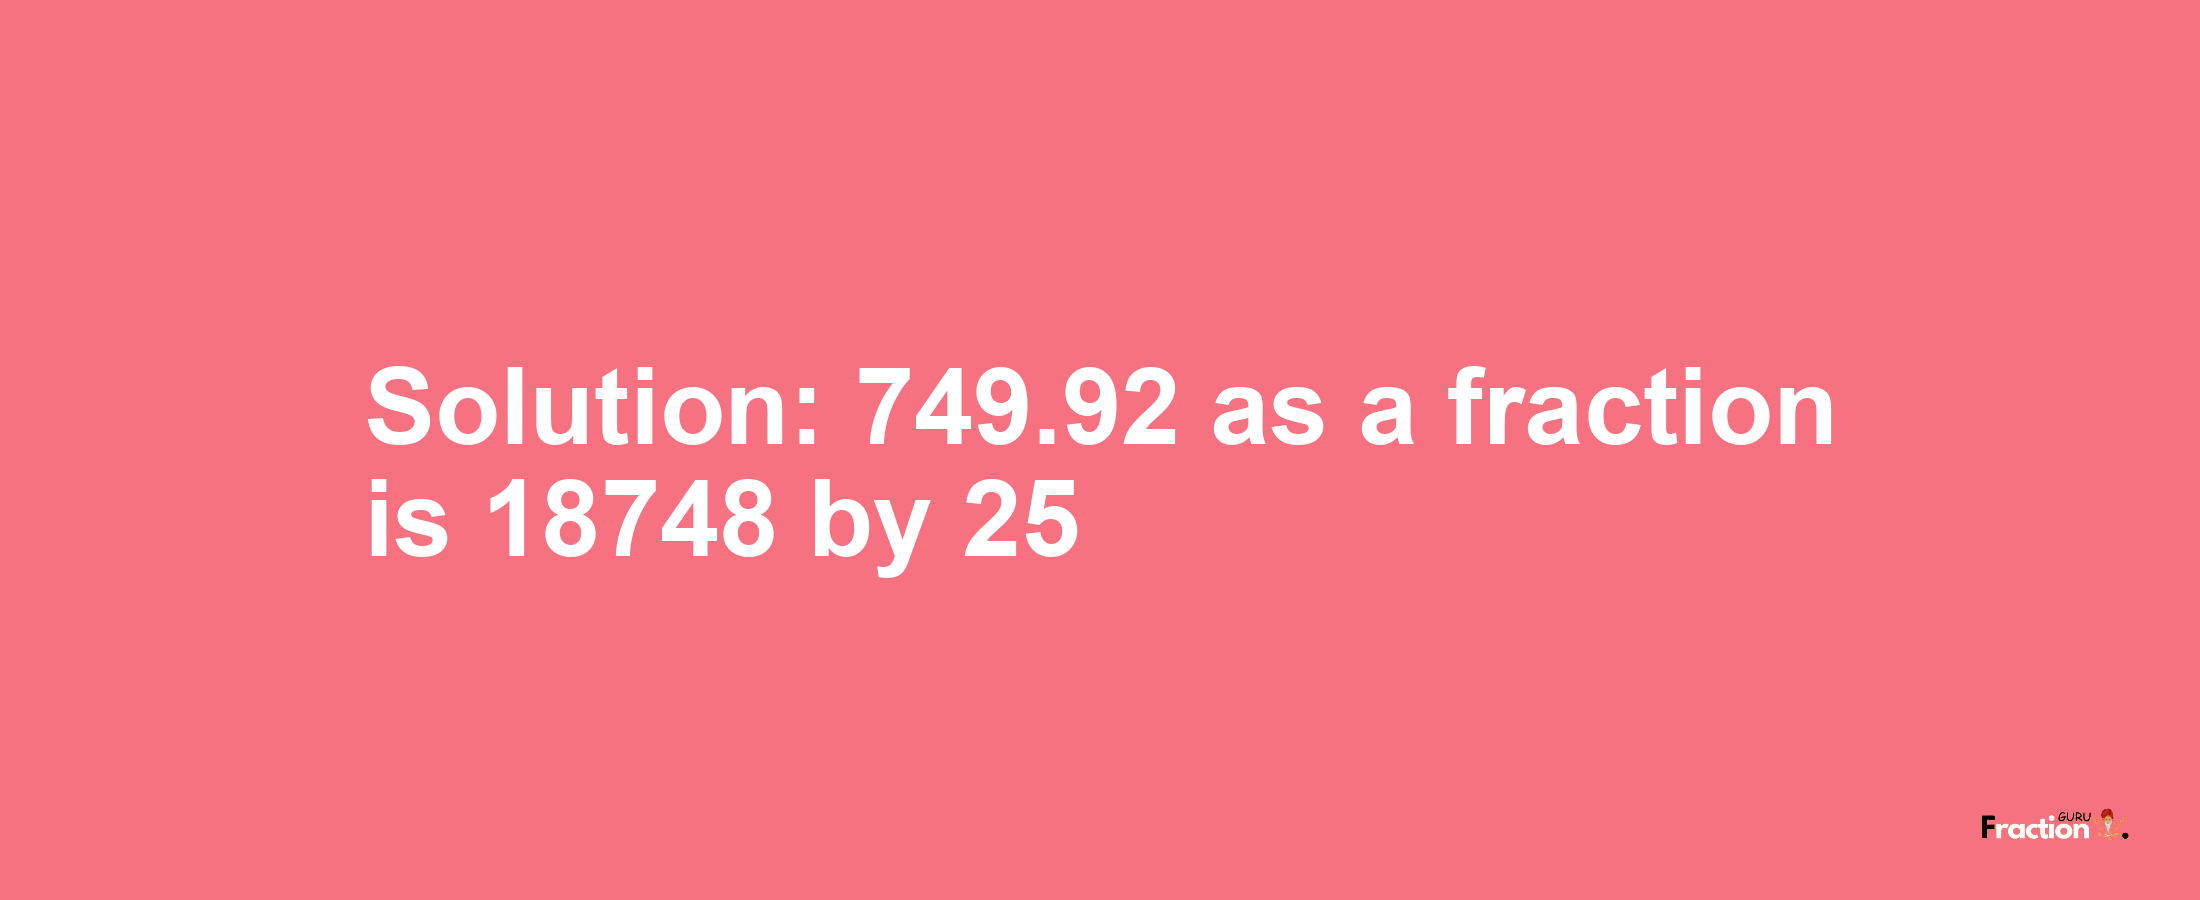 Solution:749.92 as a fraction is 18748/25